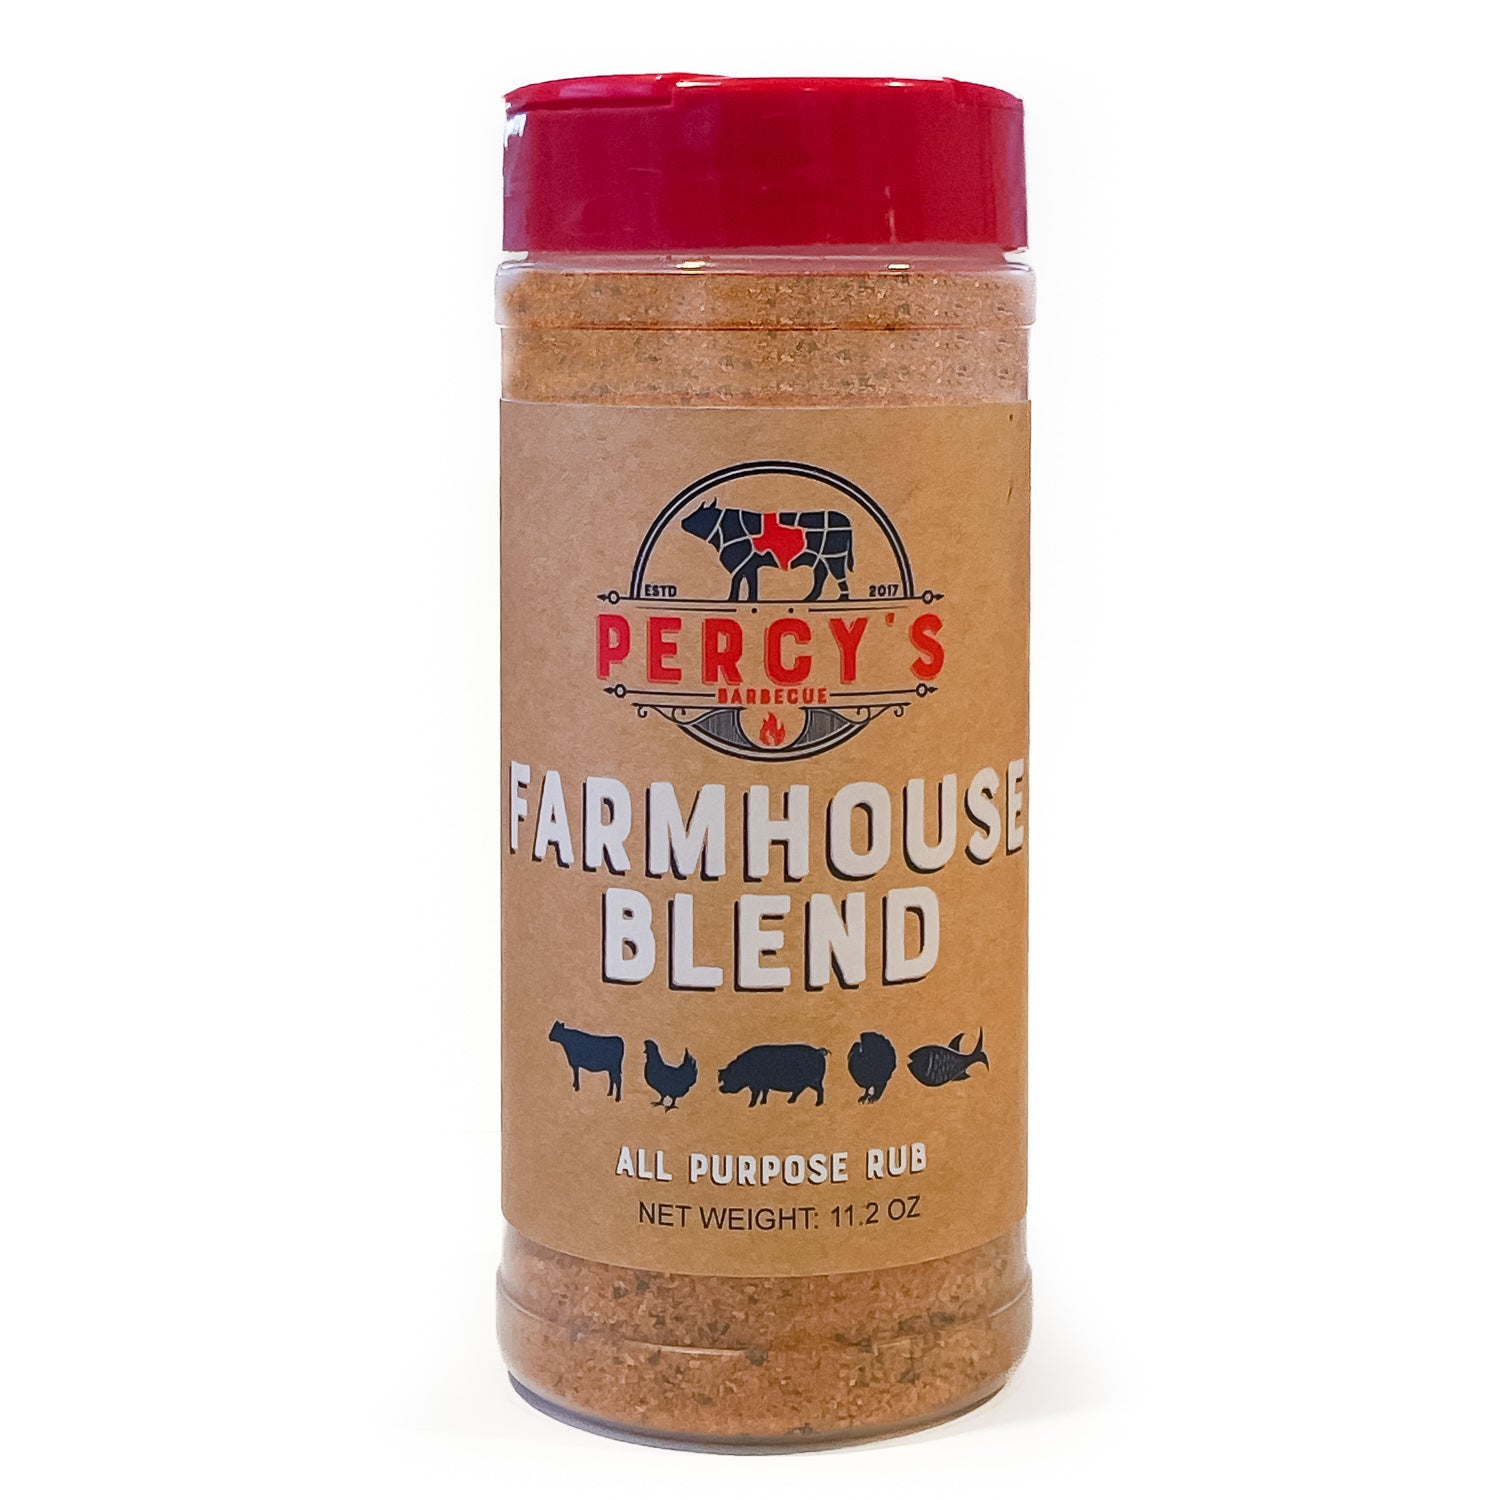 All-Purpose BBQ Rub For Wild Game, Seafood, Beef, Poultry and Pork